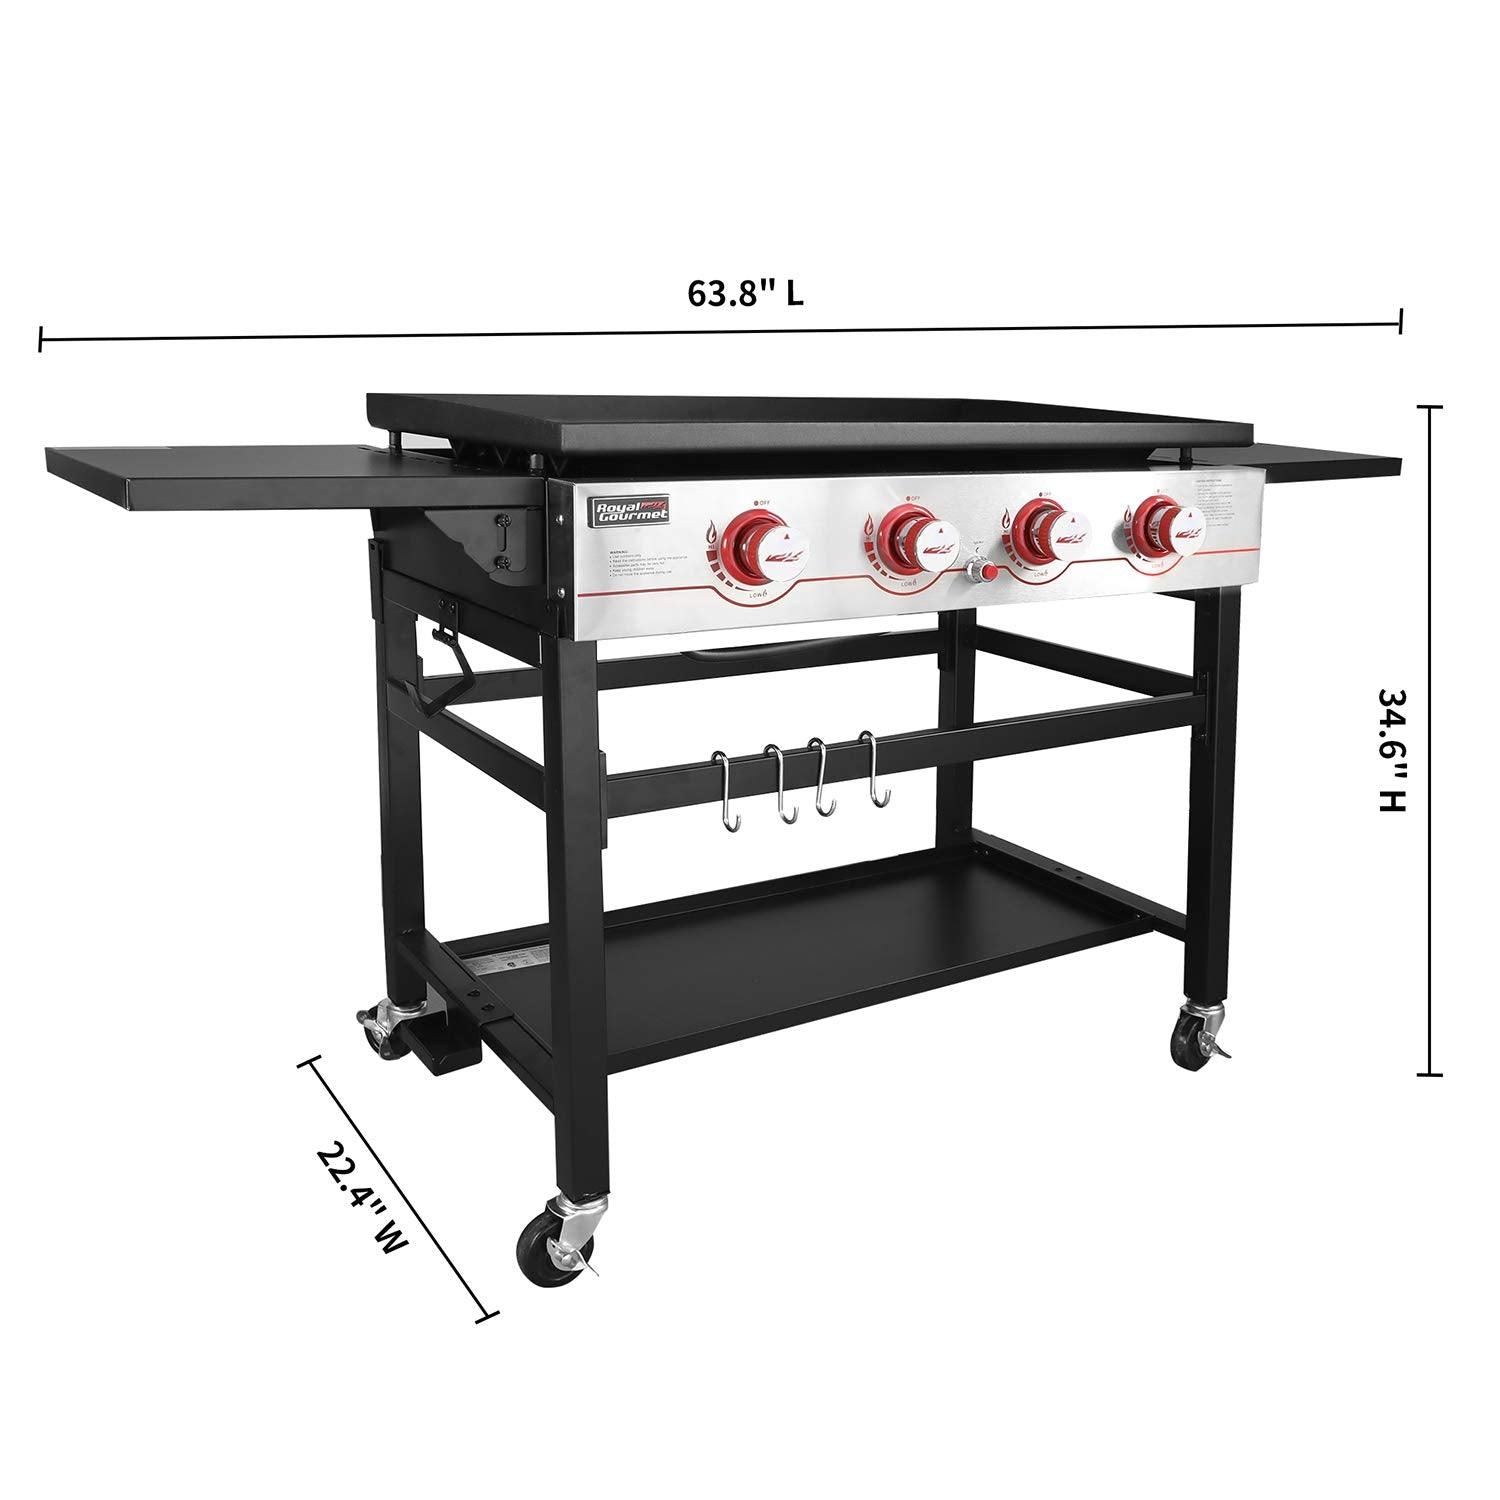 Royal Gourmet GB4000 36-inch 4-Burner Flat Top Propane Gas Grill Griddle, for BBQ, Camping, Red - CookCave